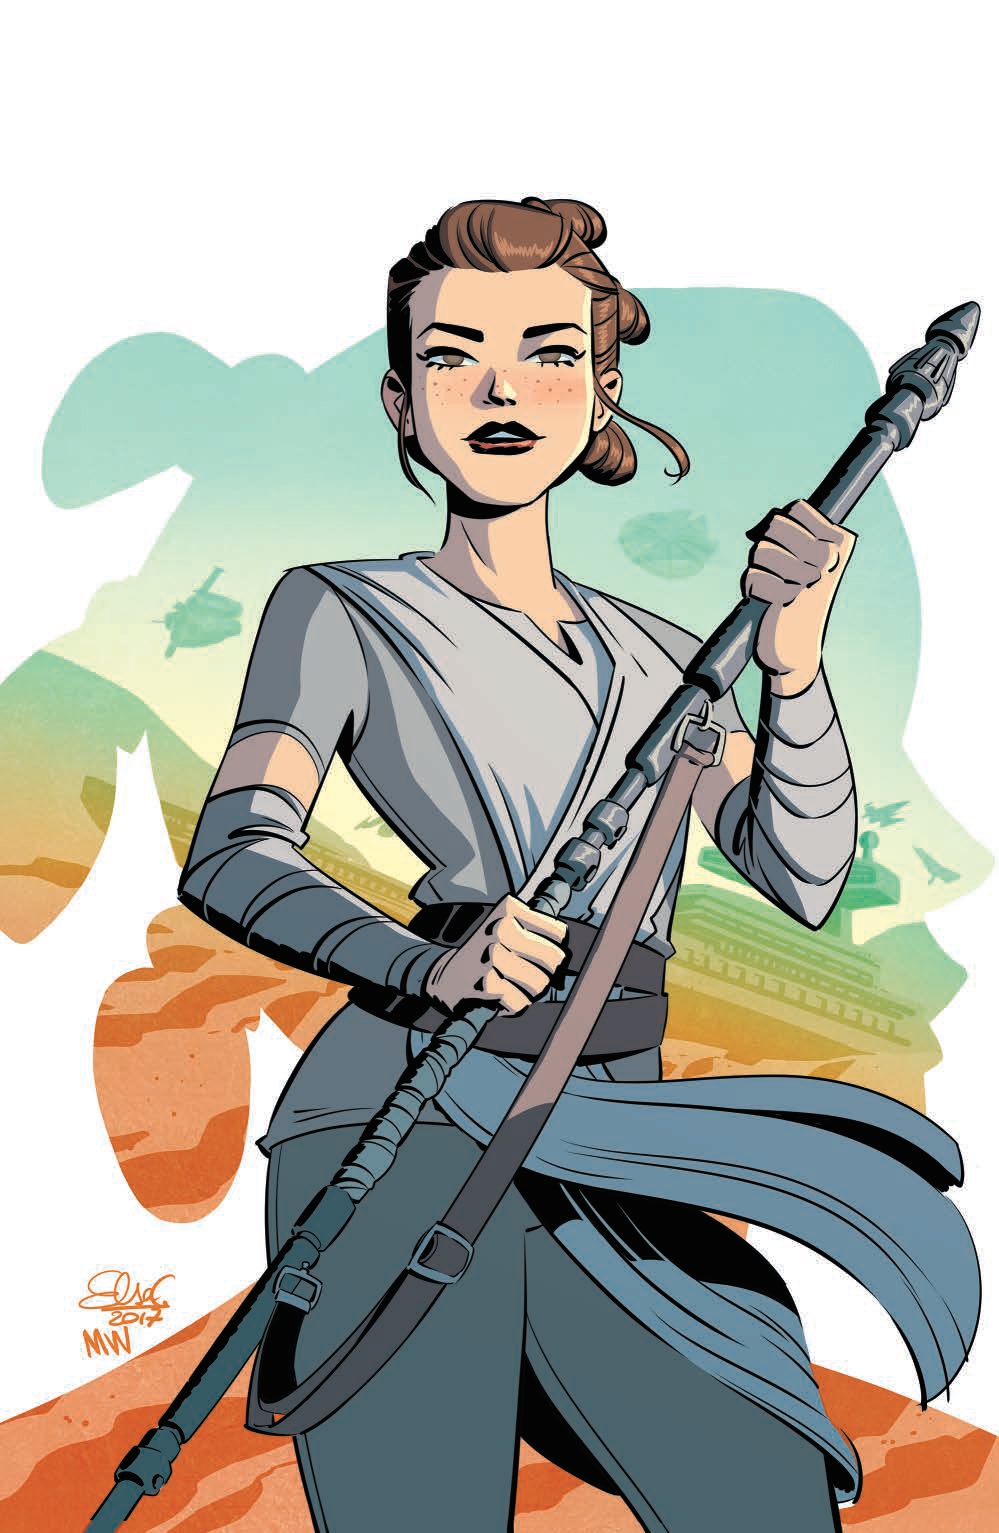 Forces of Destiny - Rey (Elsa Charretier Convention Exclusive Variant Cover) (23.03.2018)